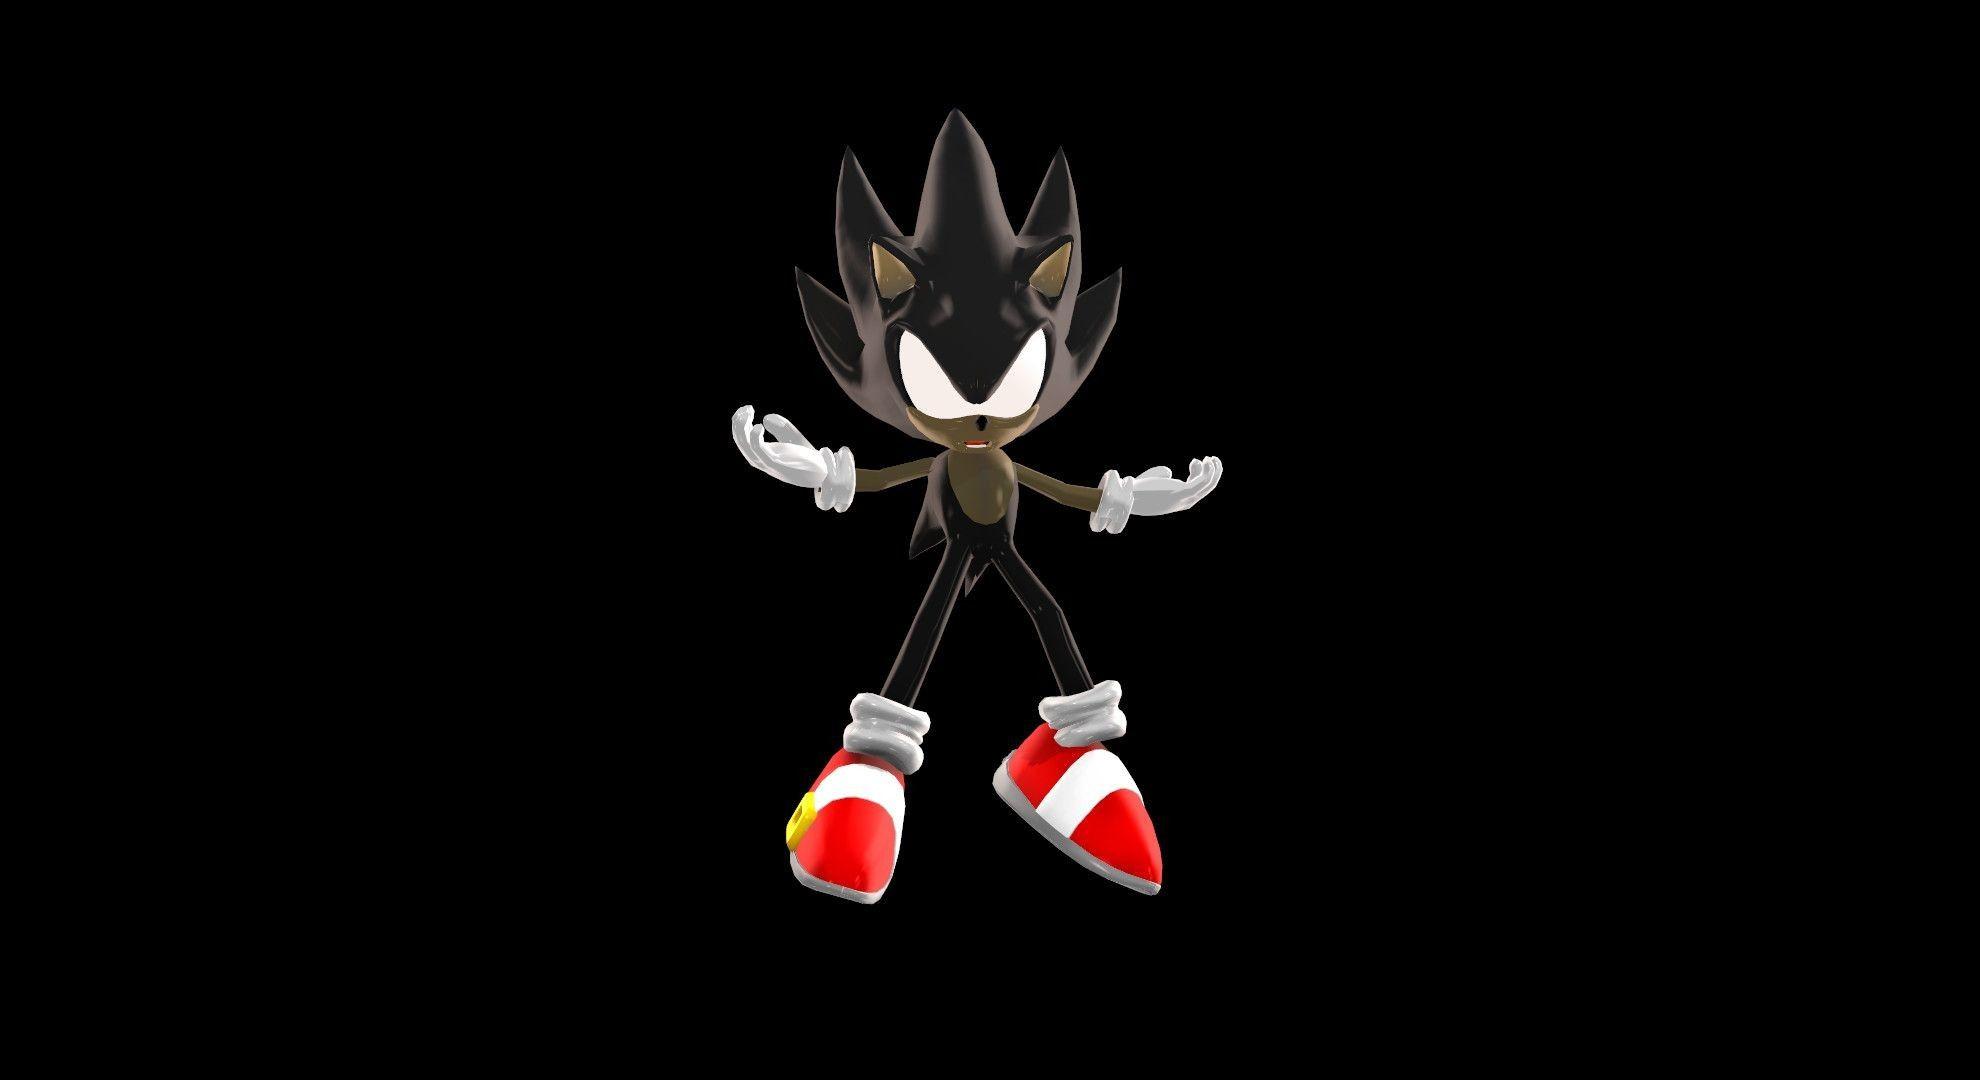 Do you think dark sonic will come in a big screen one daymaybe not but it  be awesome  rSonicTheMovie